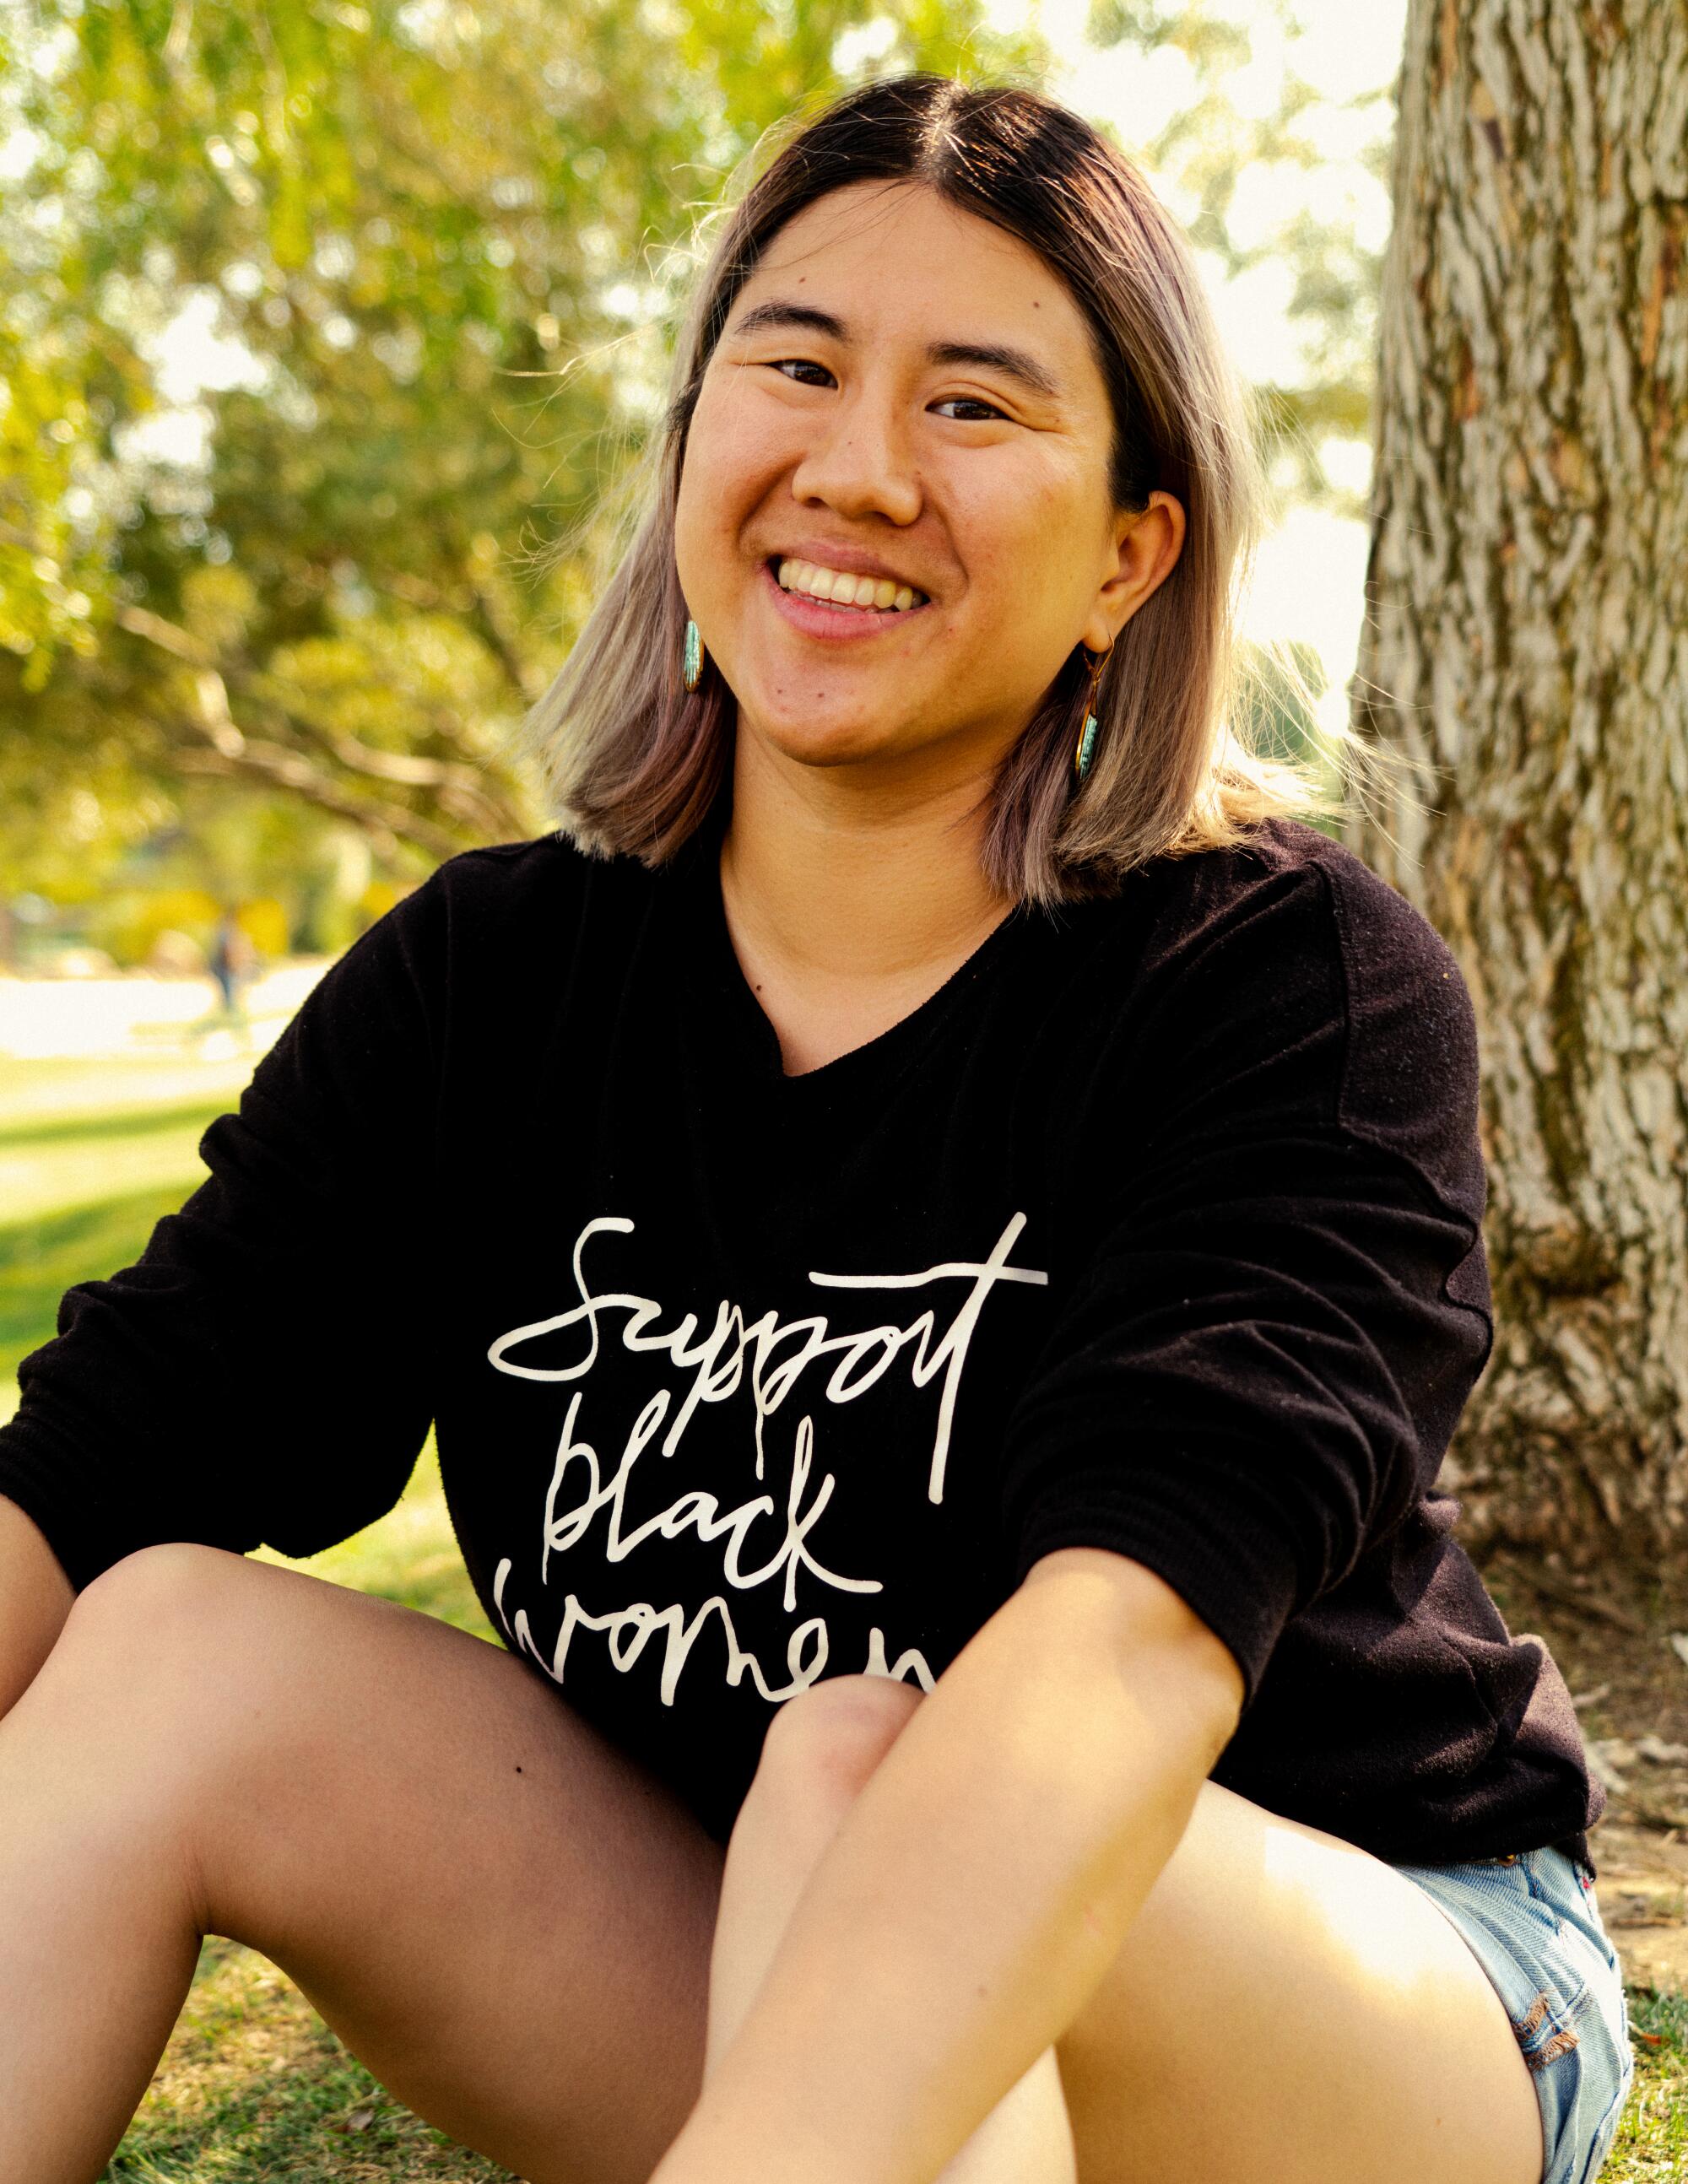 A person seated outdoors, wearing a sweatshirt that says "Support Black women" and shorts.